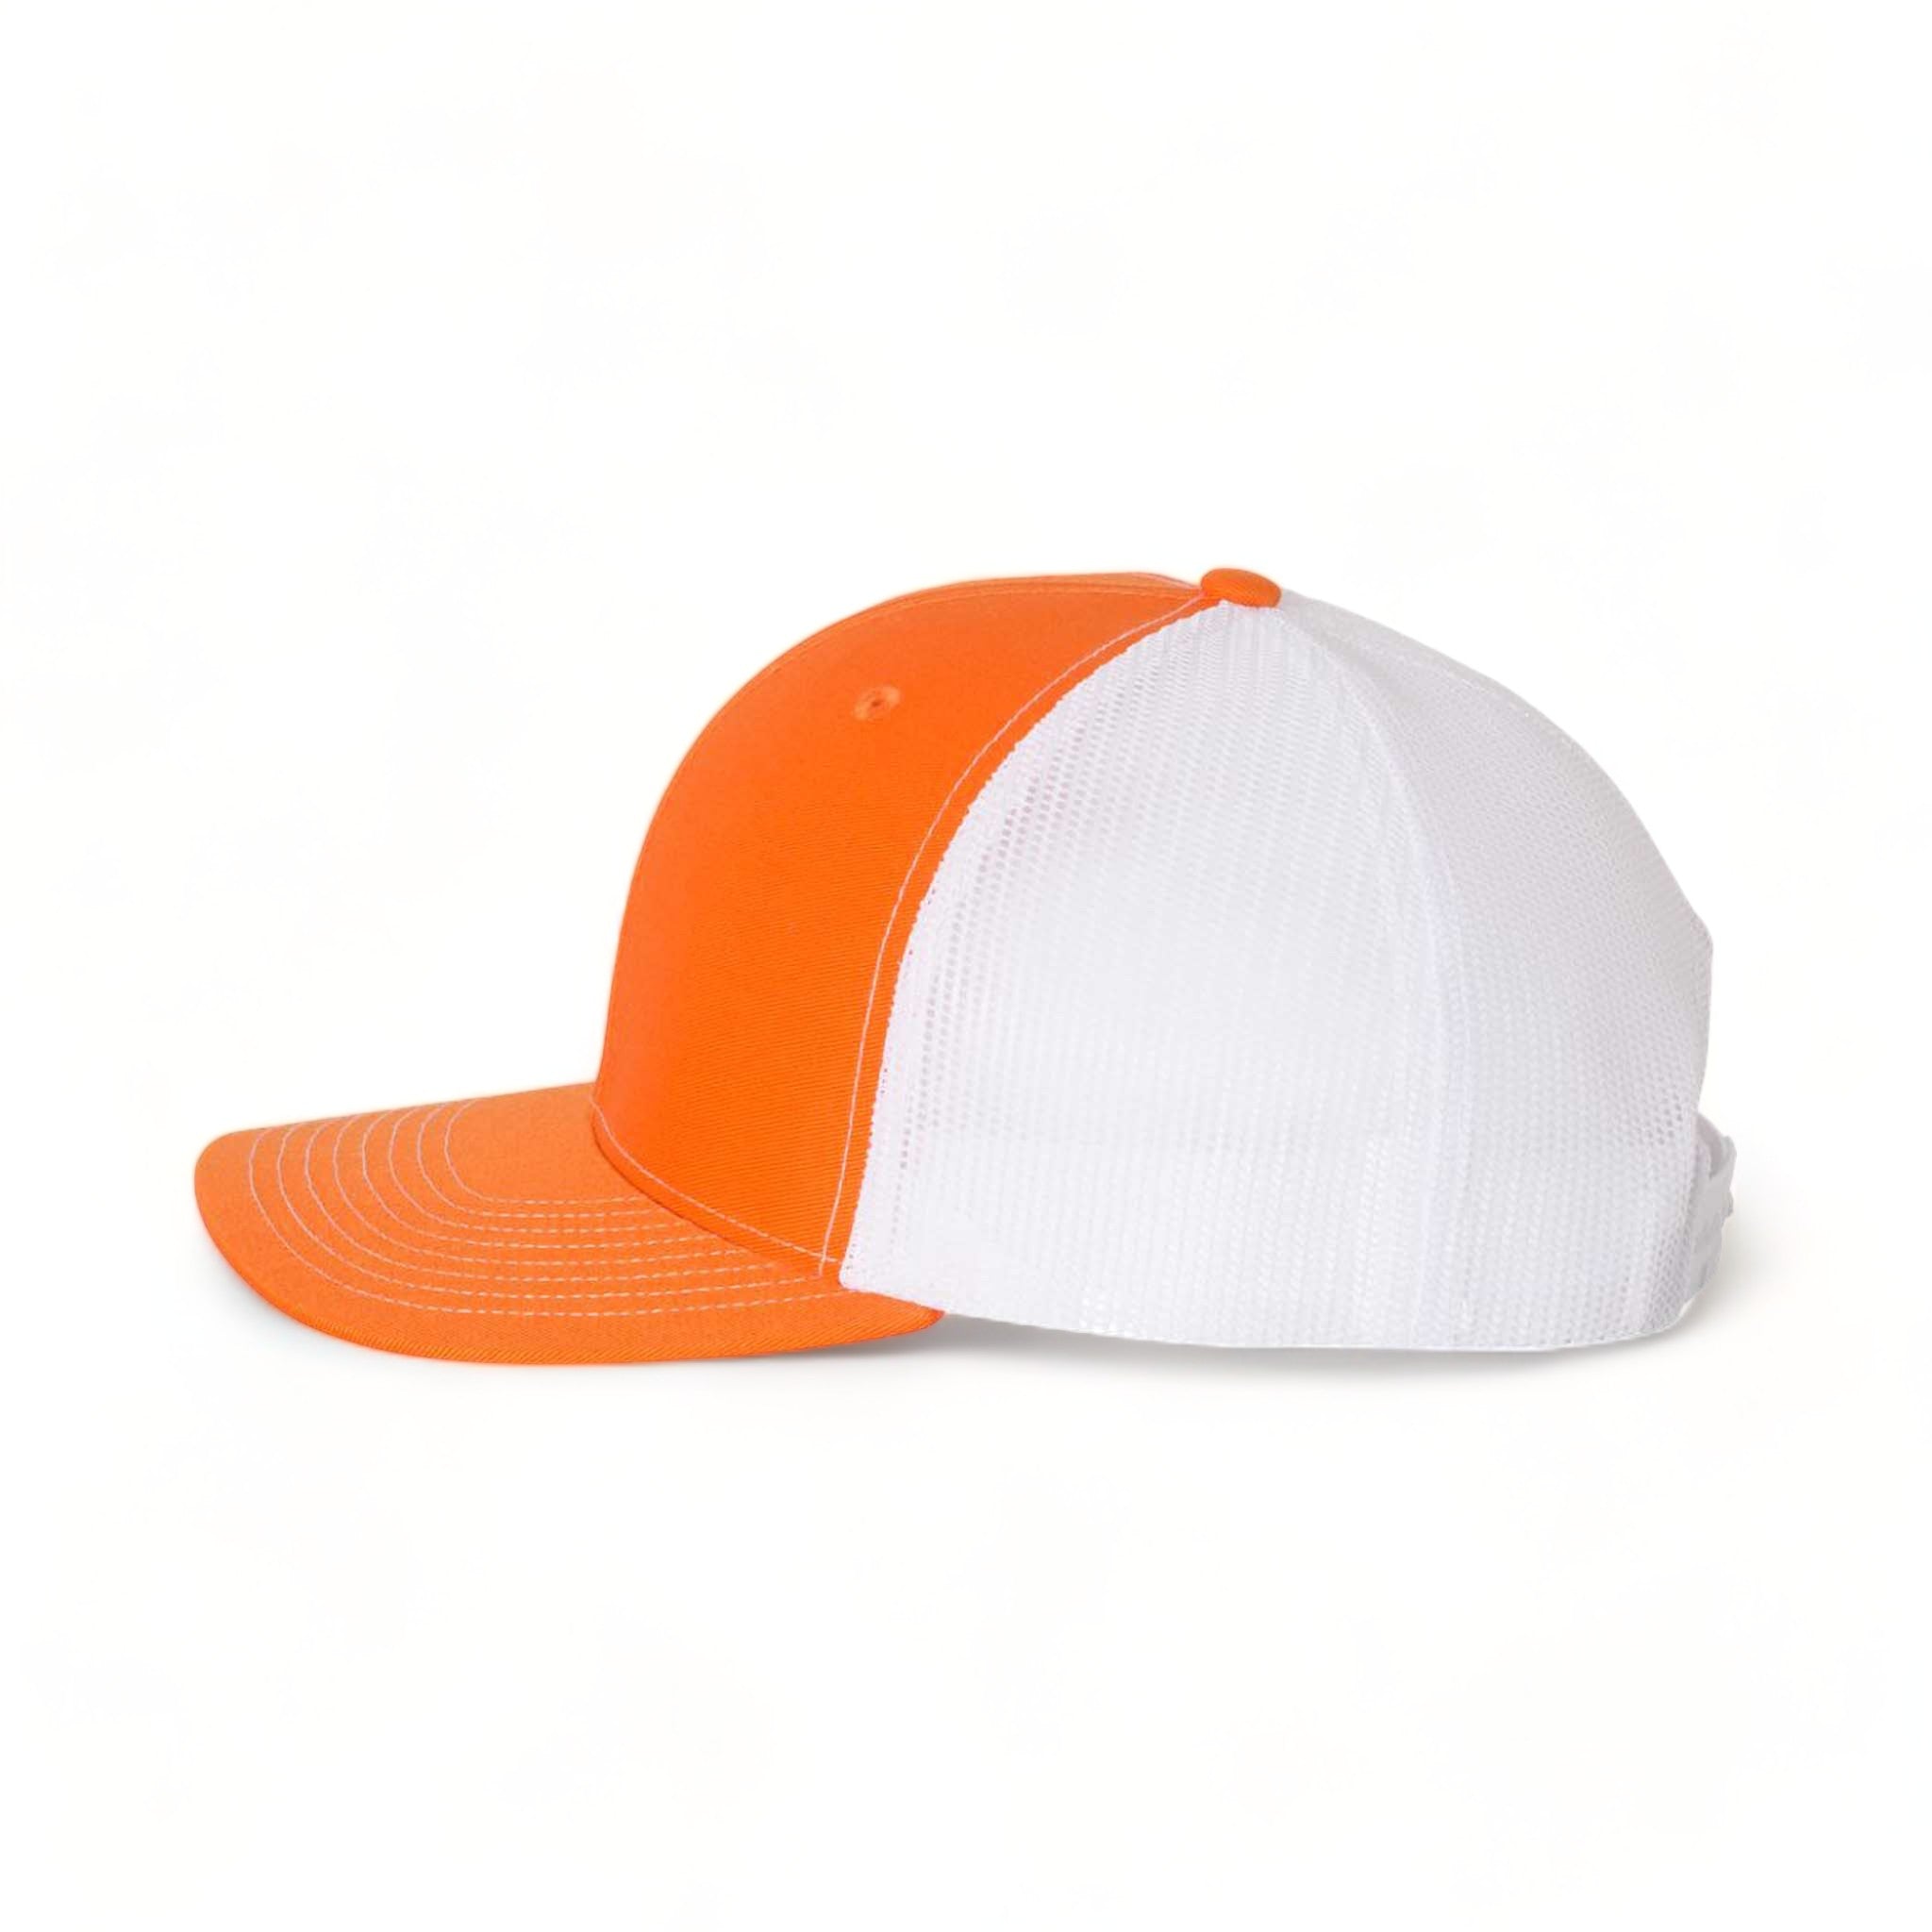 Side view of Richardson 112 custom hat in orange and white